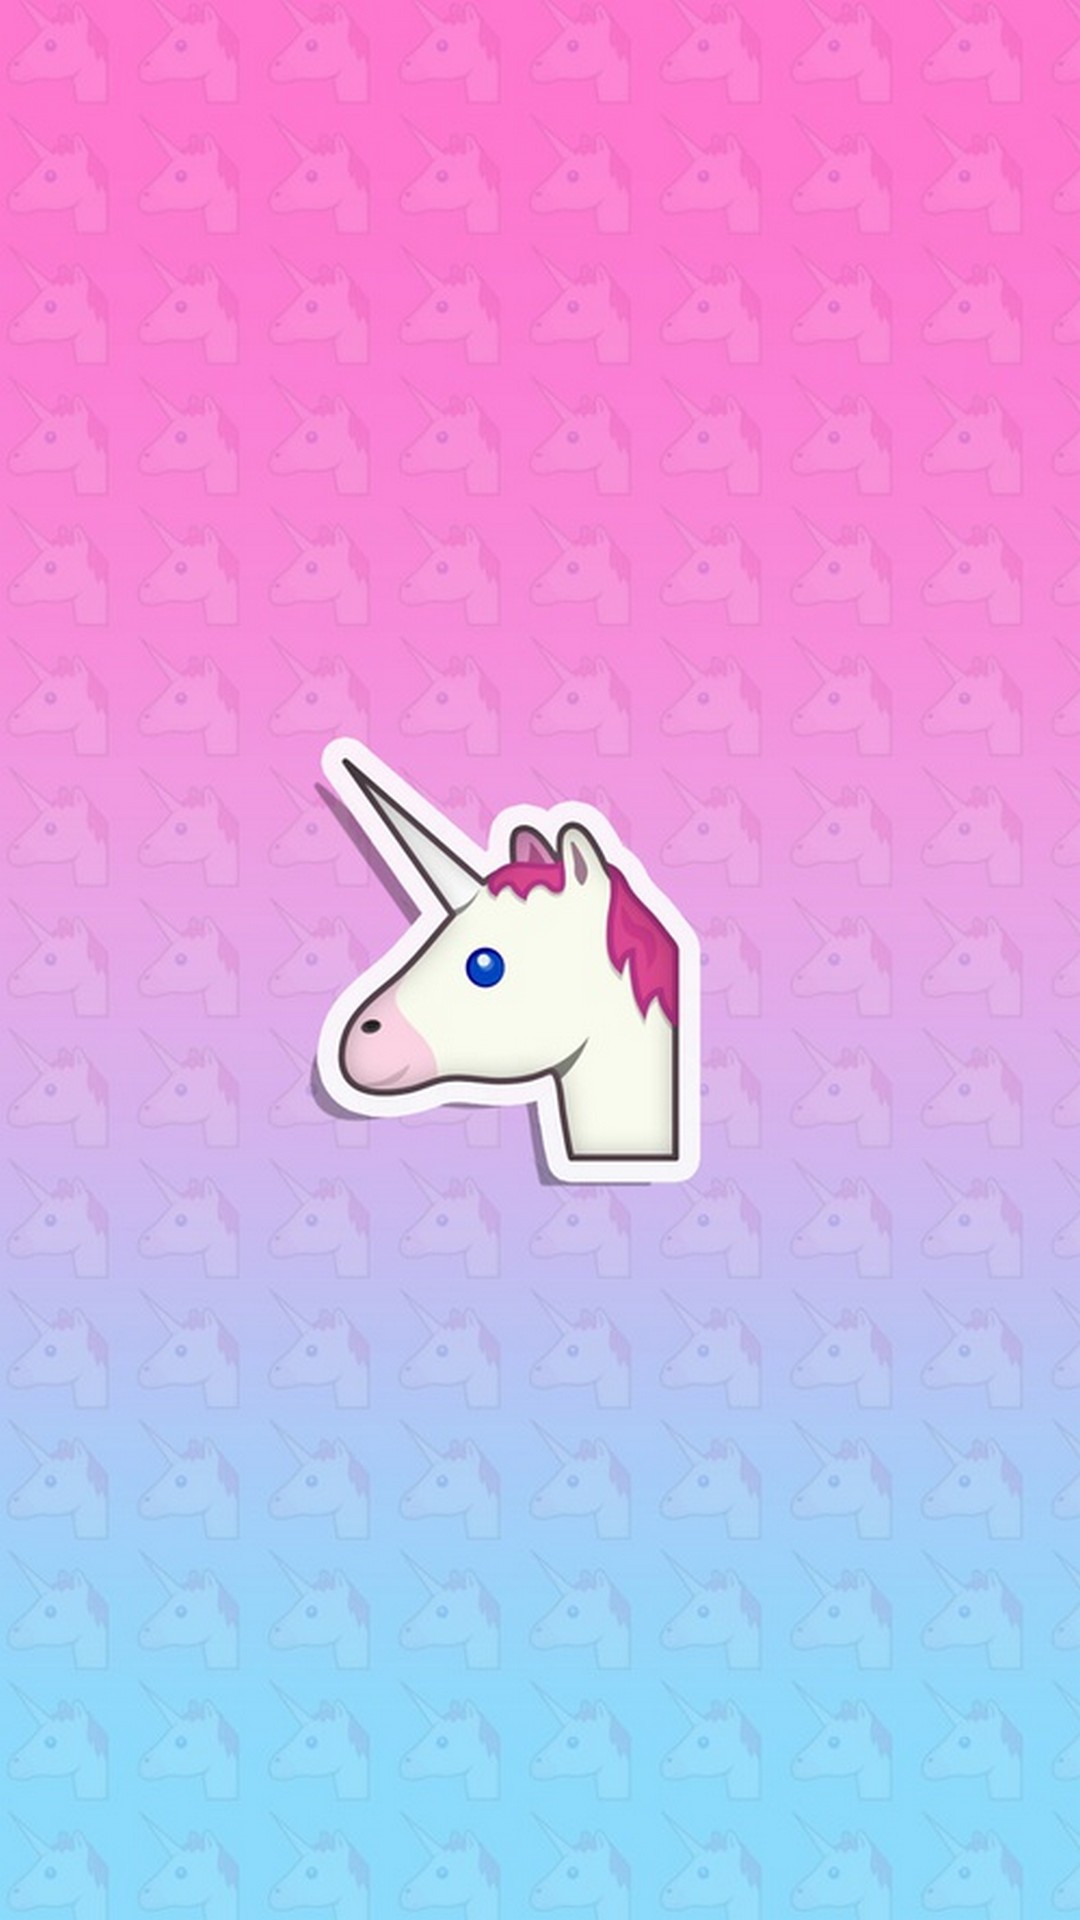 Wallpapers Phone Cute Girly Unicorn With high-resolution 1080X1920 pixel. You can use this wallpaper for your Android backgrounds, Tablet, Samsung Screensavers, Mobile Phone Lock Screen and another Smartphones device